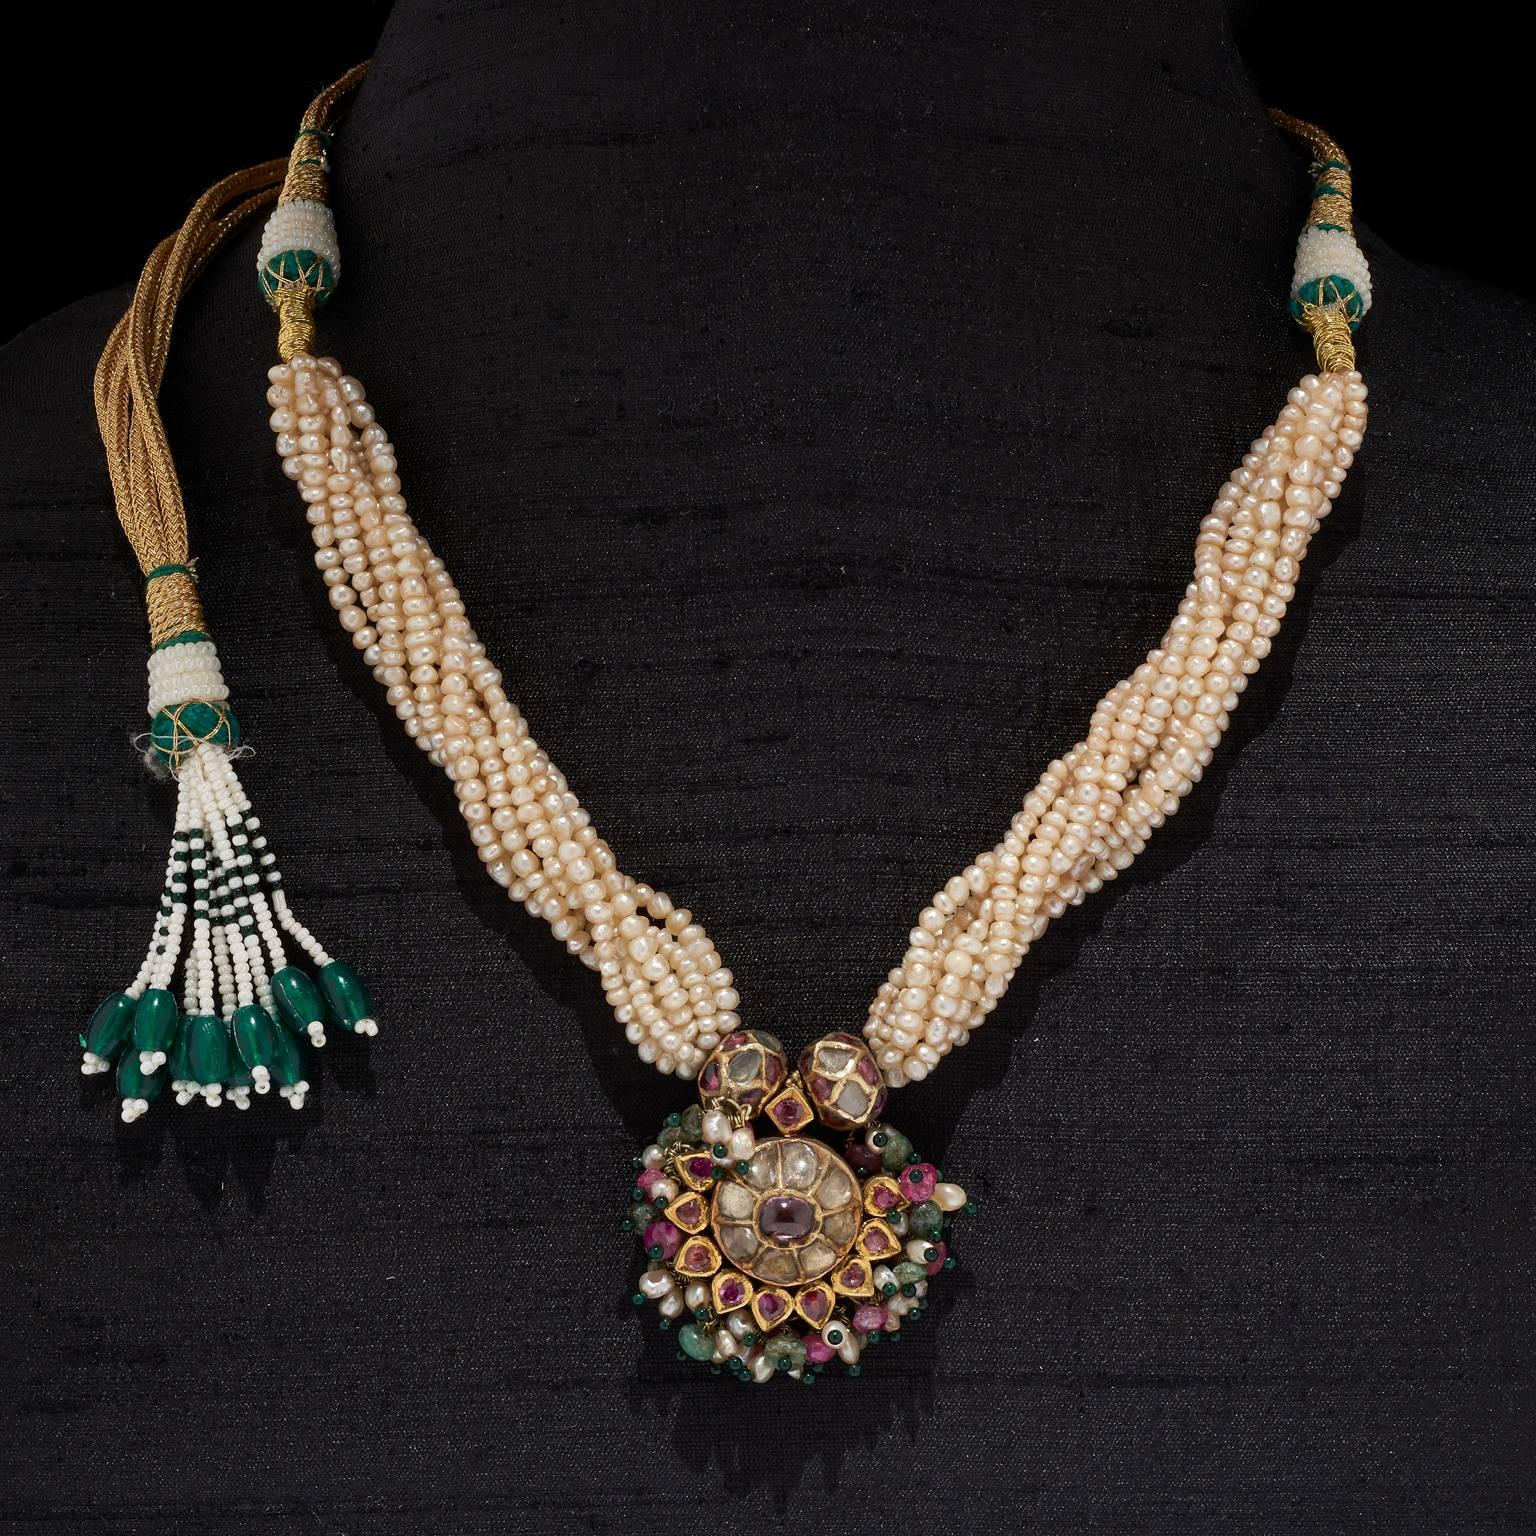 Necklace
Hyderabad, Deccan, India
18th Century

Fabricated from gold the centre piece in 'tanmani' style is kundan (traditional pure gold setting) set with diamonds and rubies with a cluster of pearls, emerald and ruby beads on the fringe.